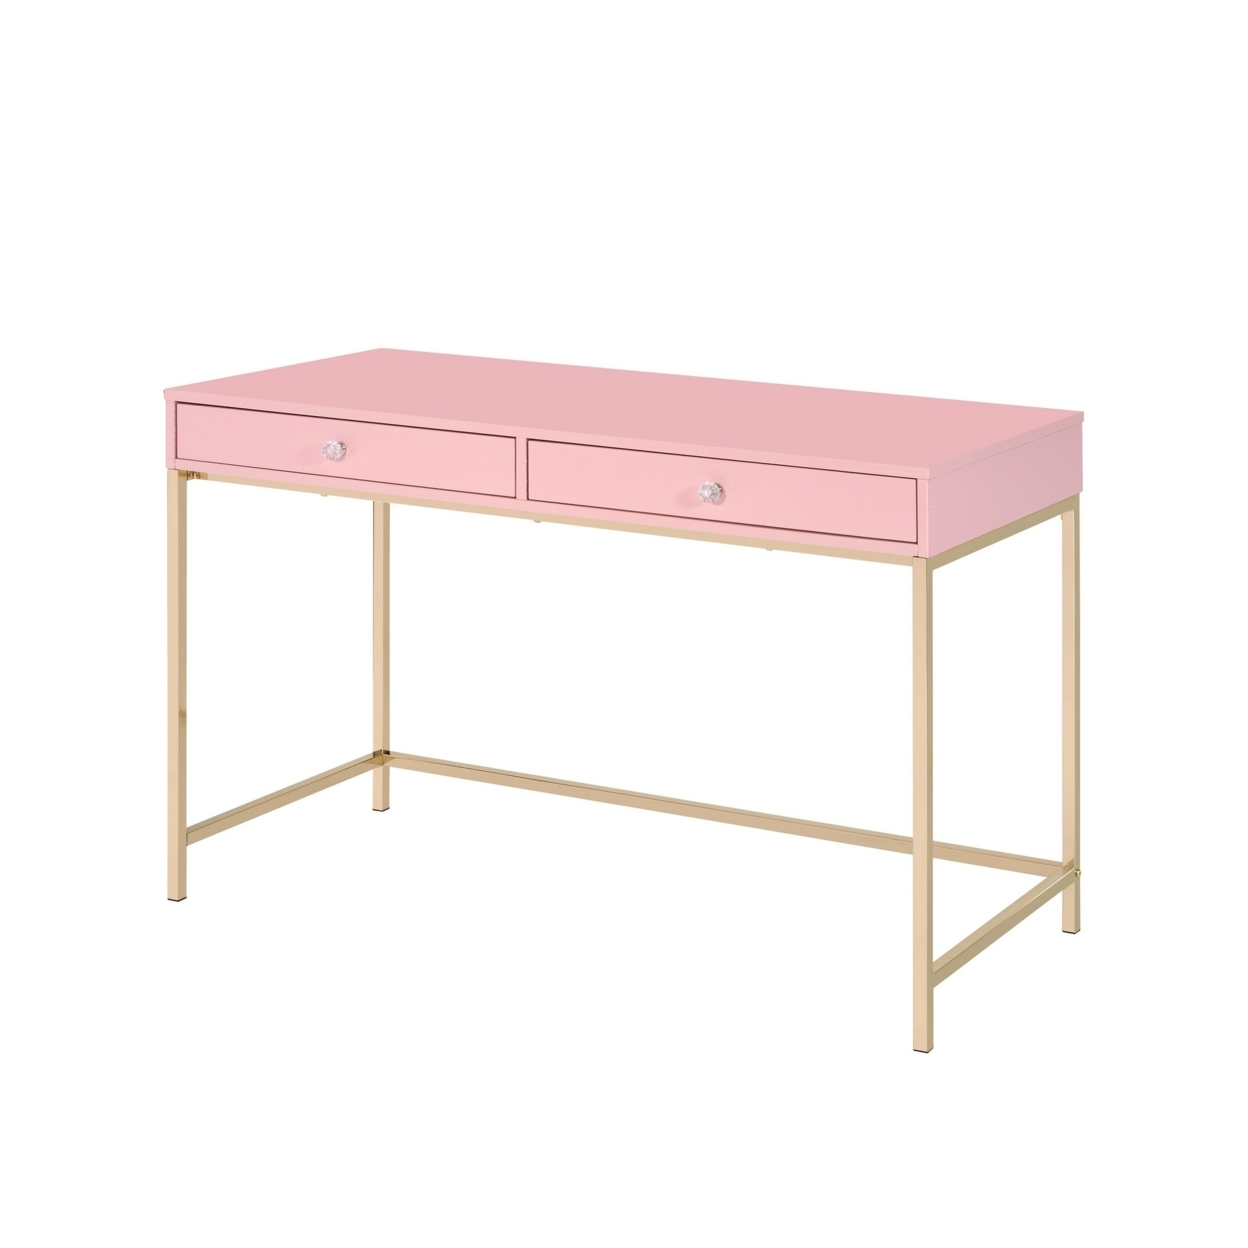 Writing Desk With 2 Storage Compartments, Pink And Gold- Saltoro Sherpi